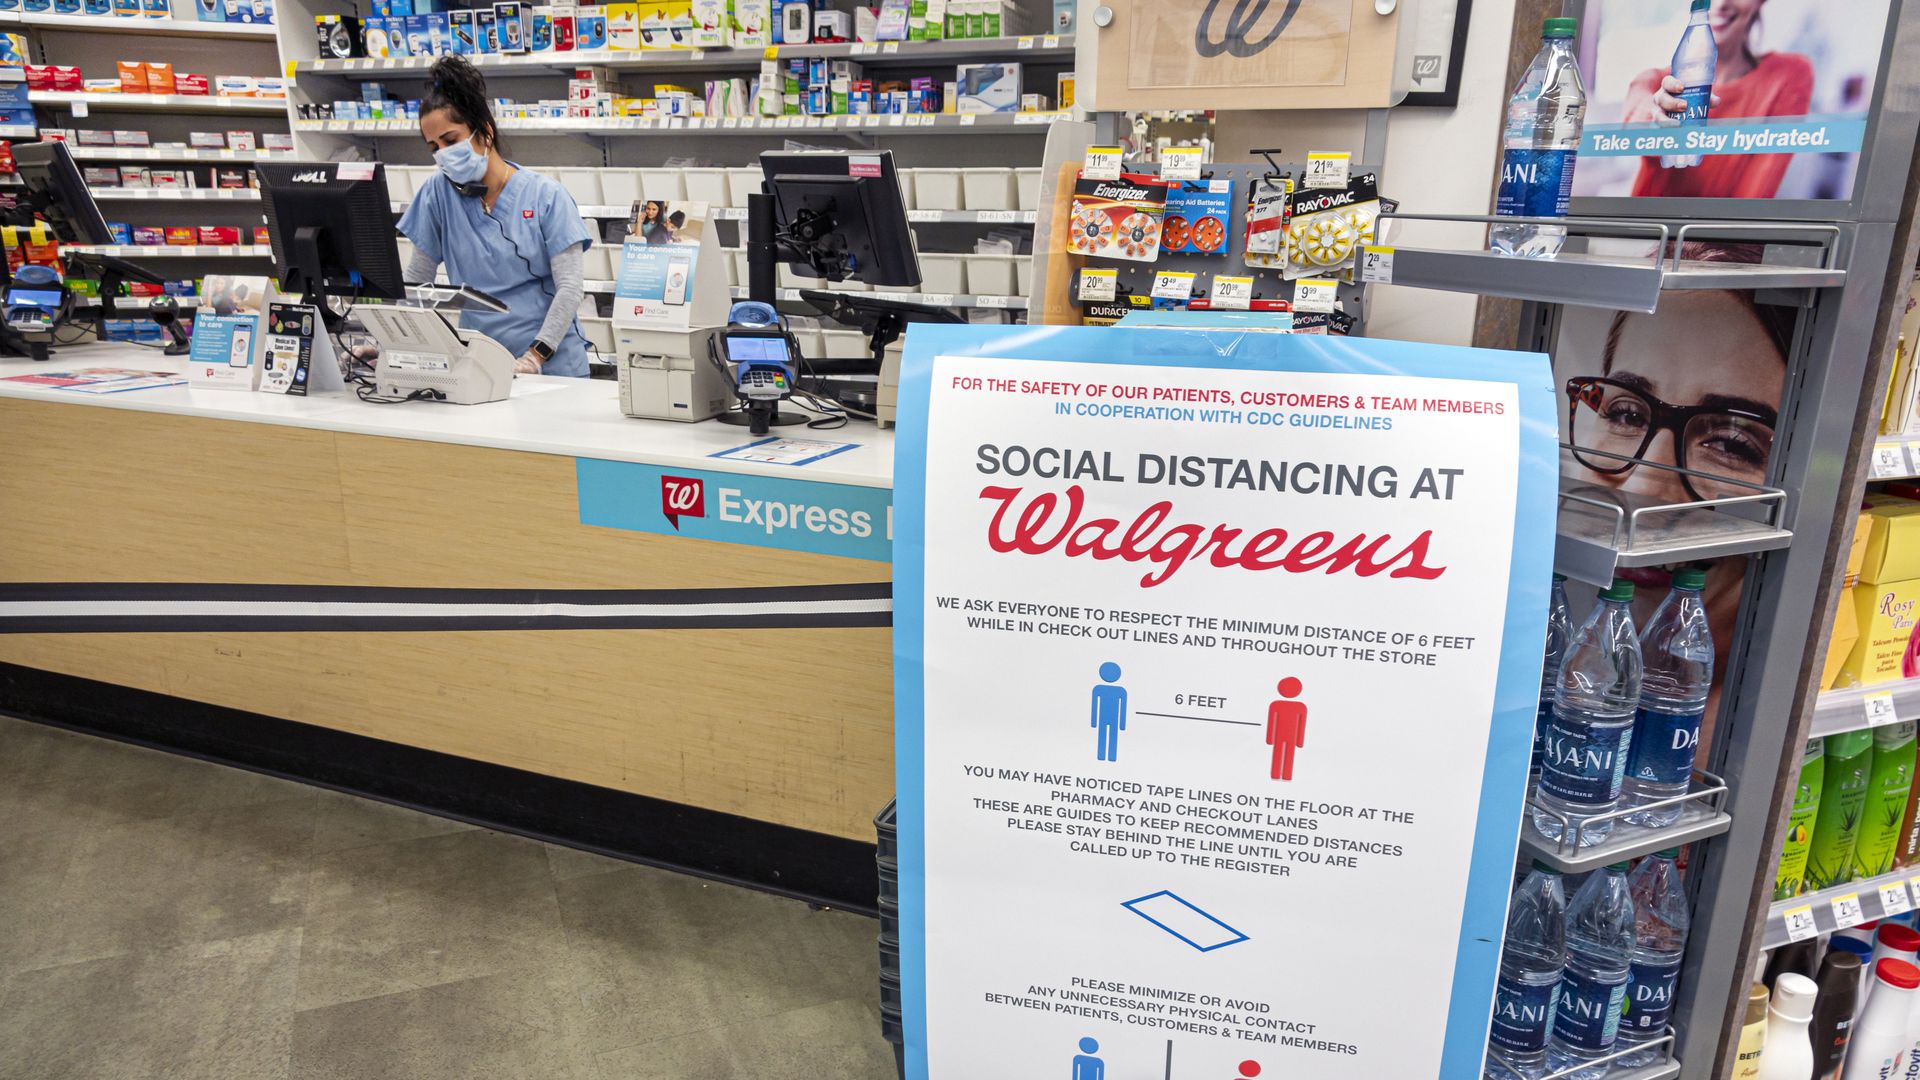 A social distancing sign in a Walgreens pharmacy.